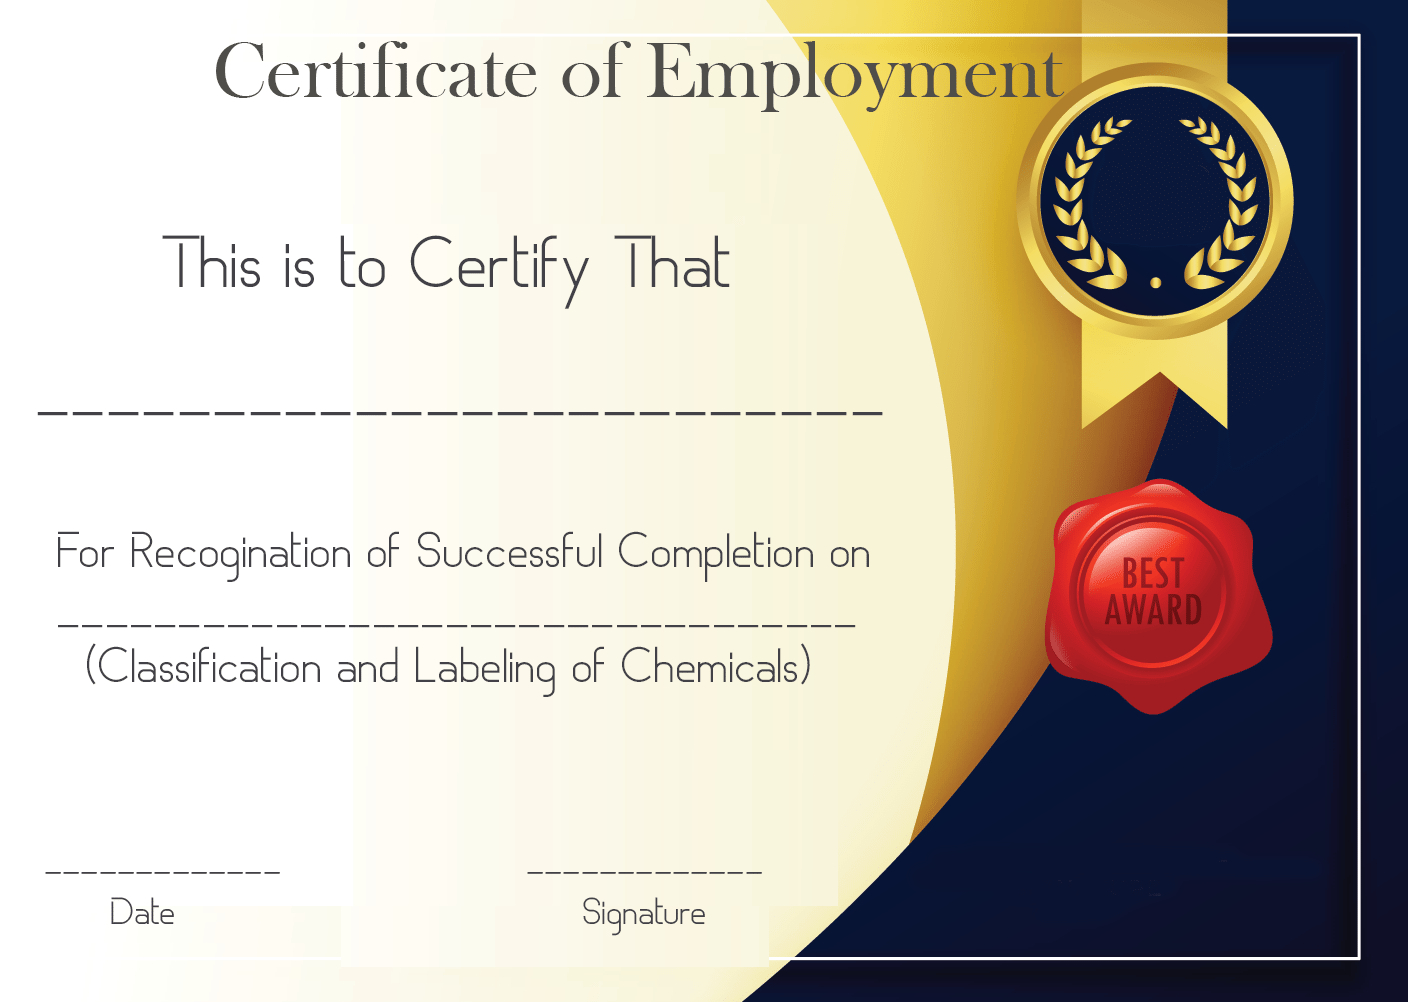 Free Sample Certificate Of Employment Template | Certificate With Regard To Sample Certificate Employment Template